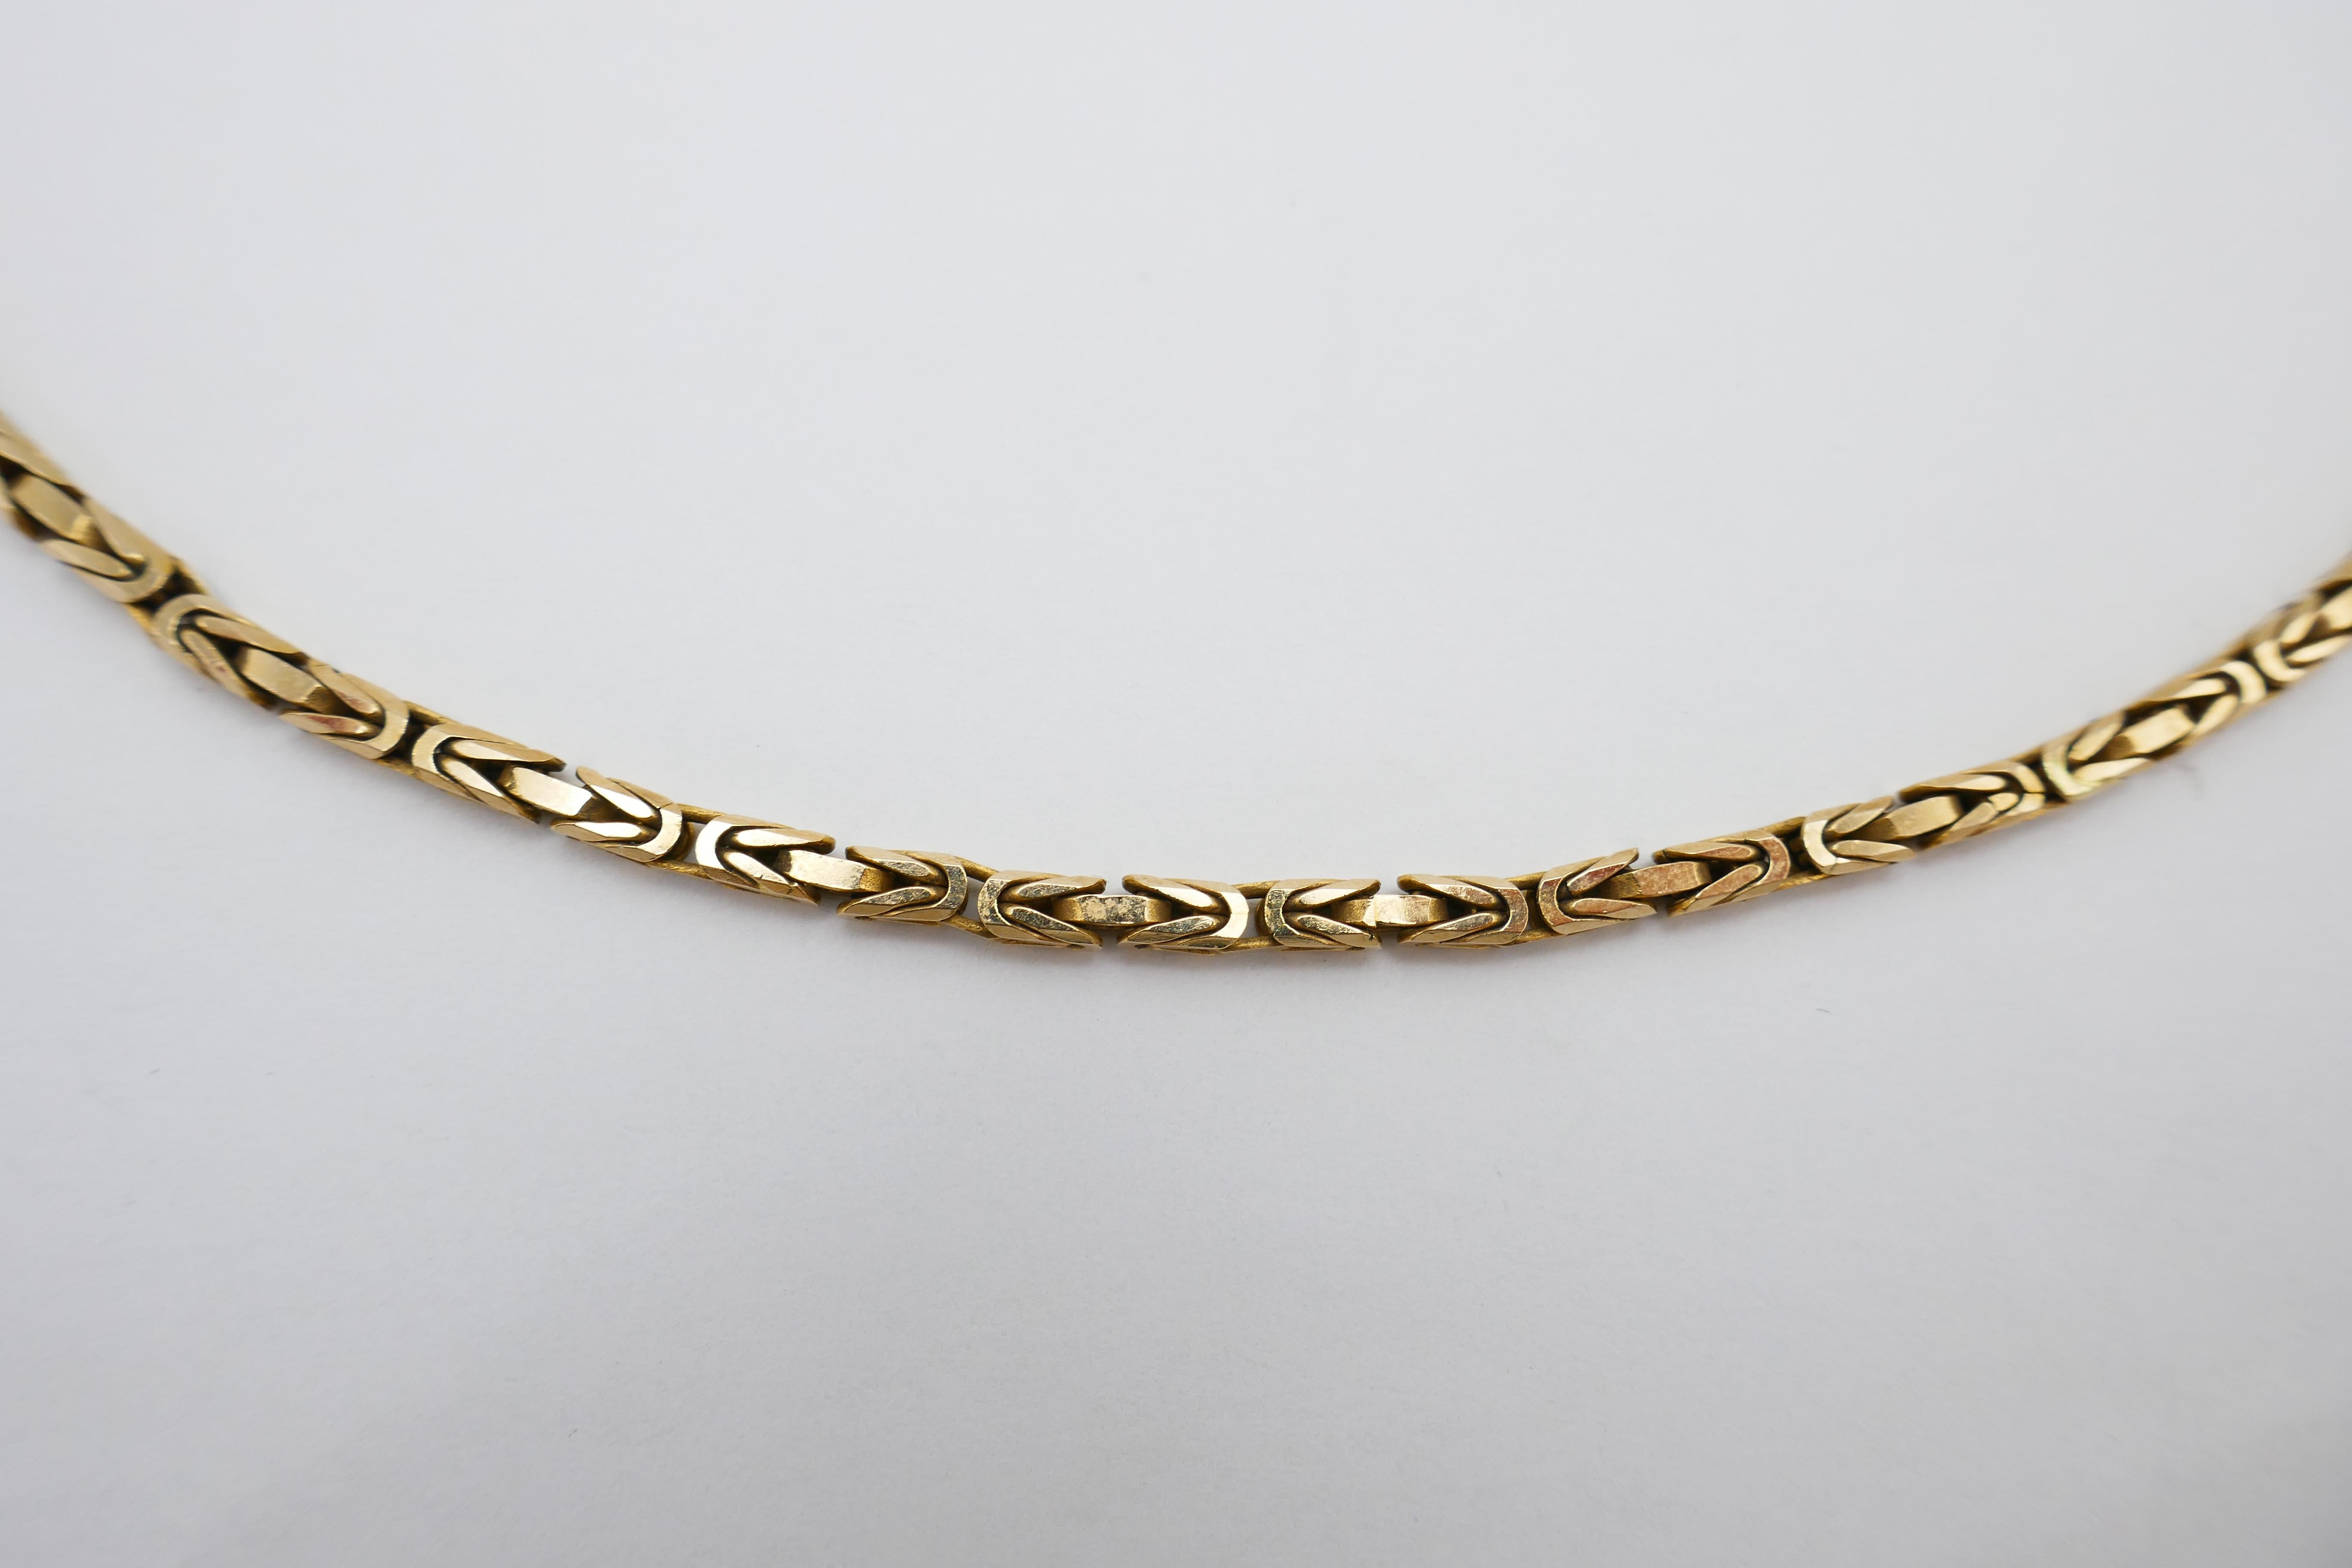 Women's or Men's Antique Italian Byzantine Yellow Gold Chain Necklace